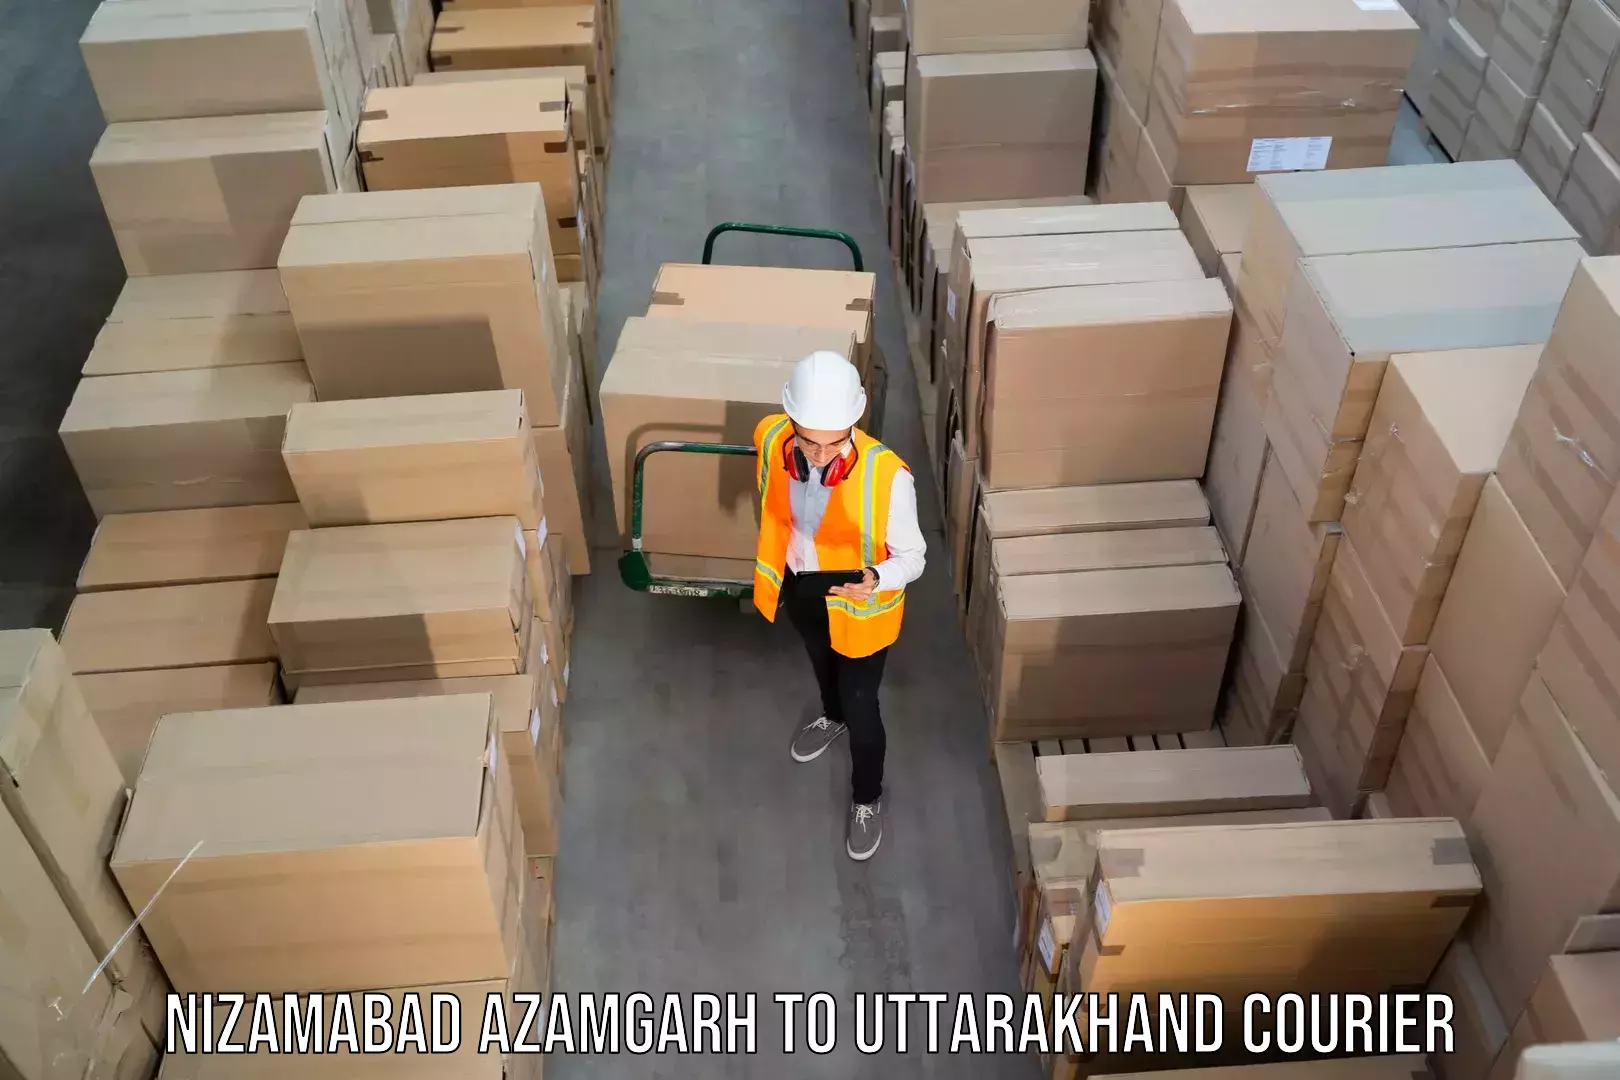 Nationwide parcel services Nizamabad Azamgarh to Mussoorie